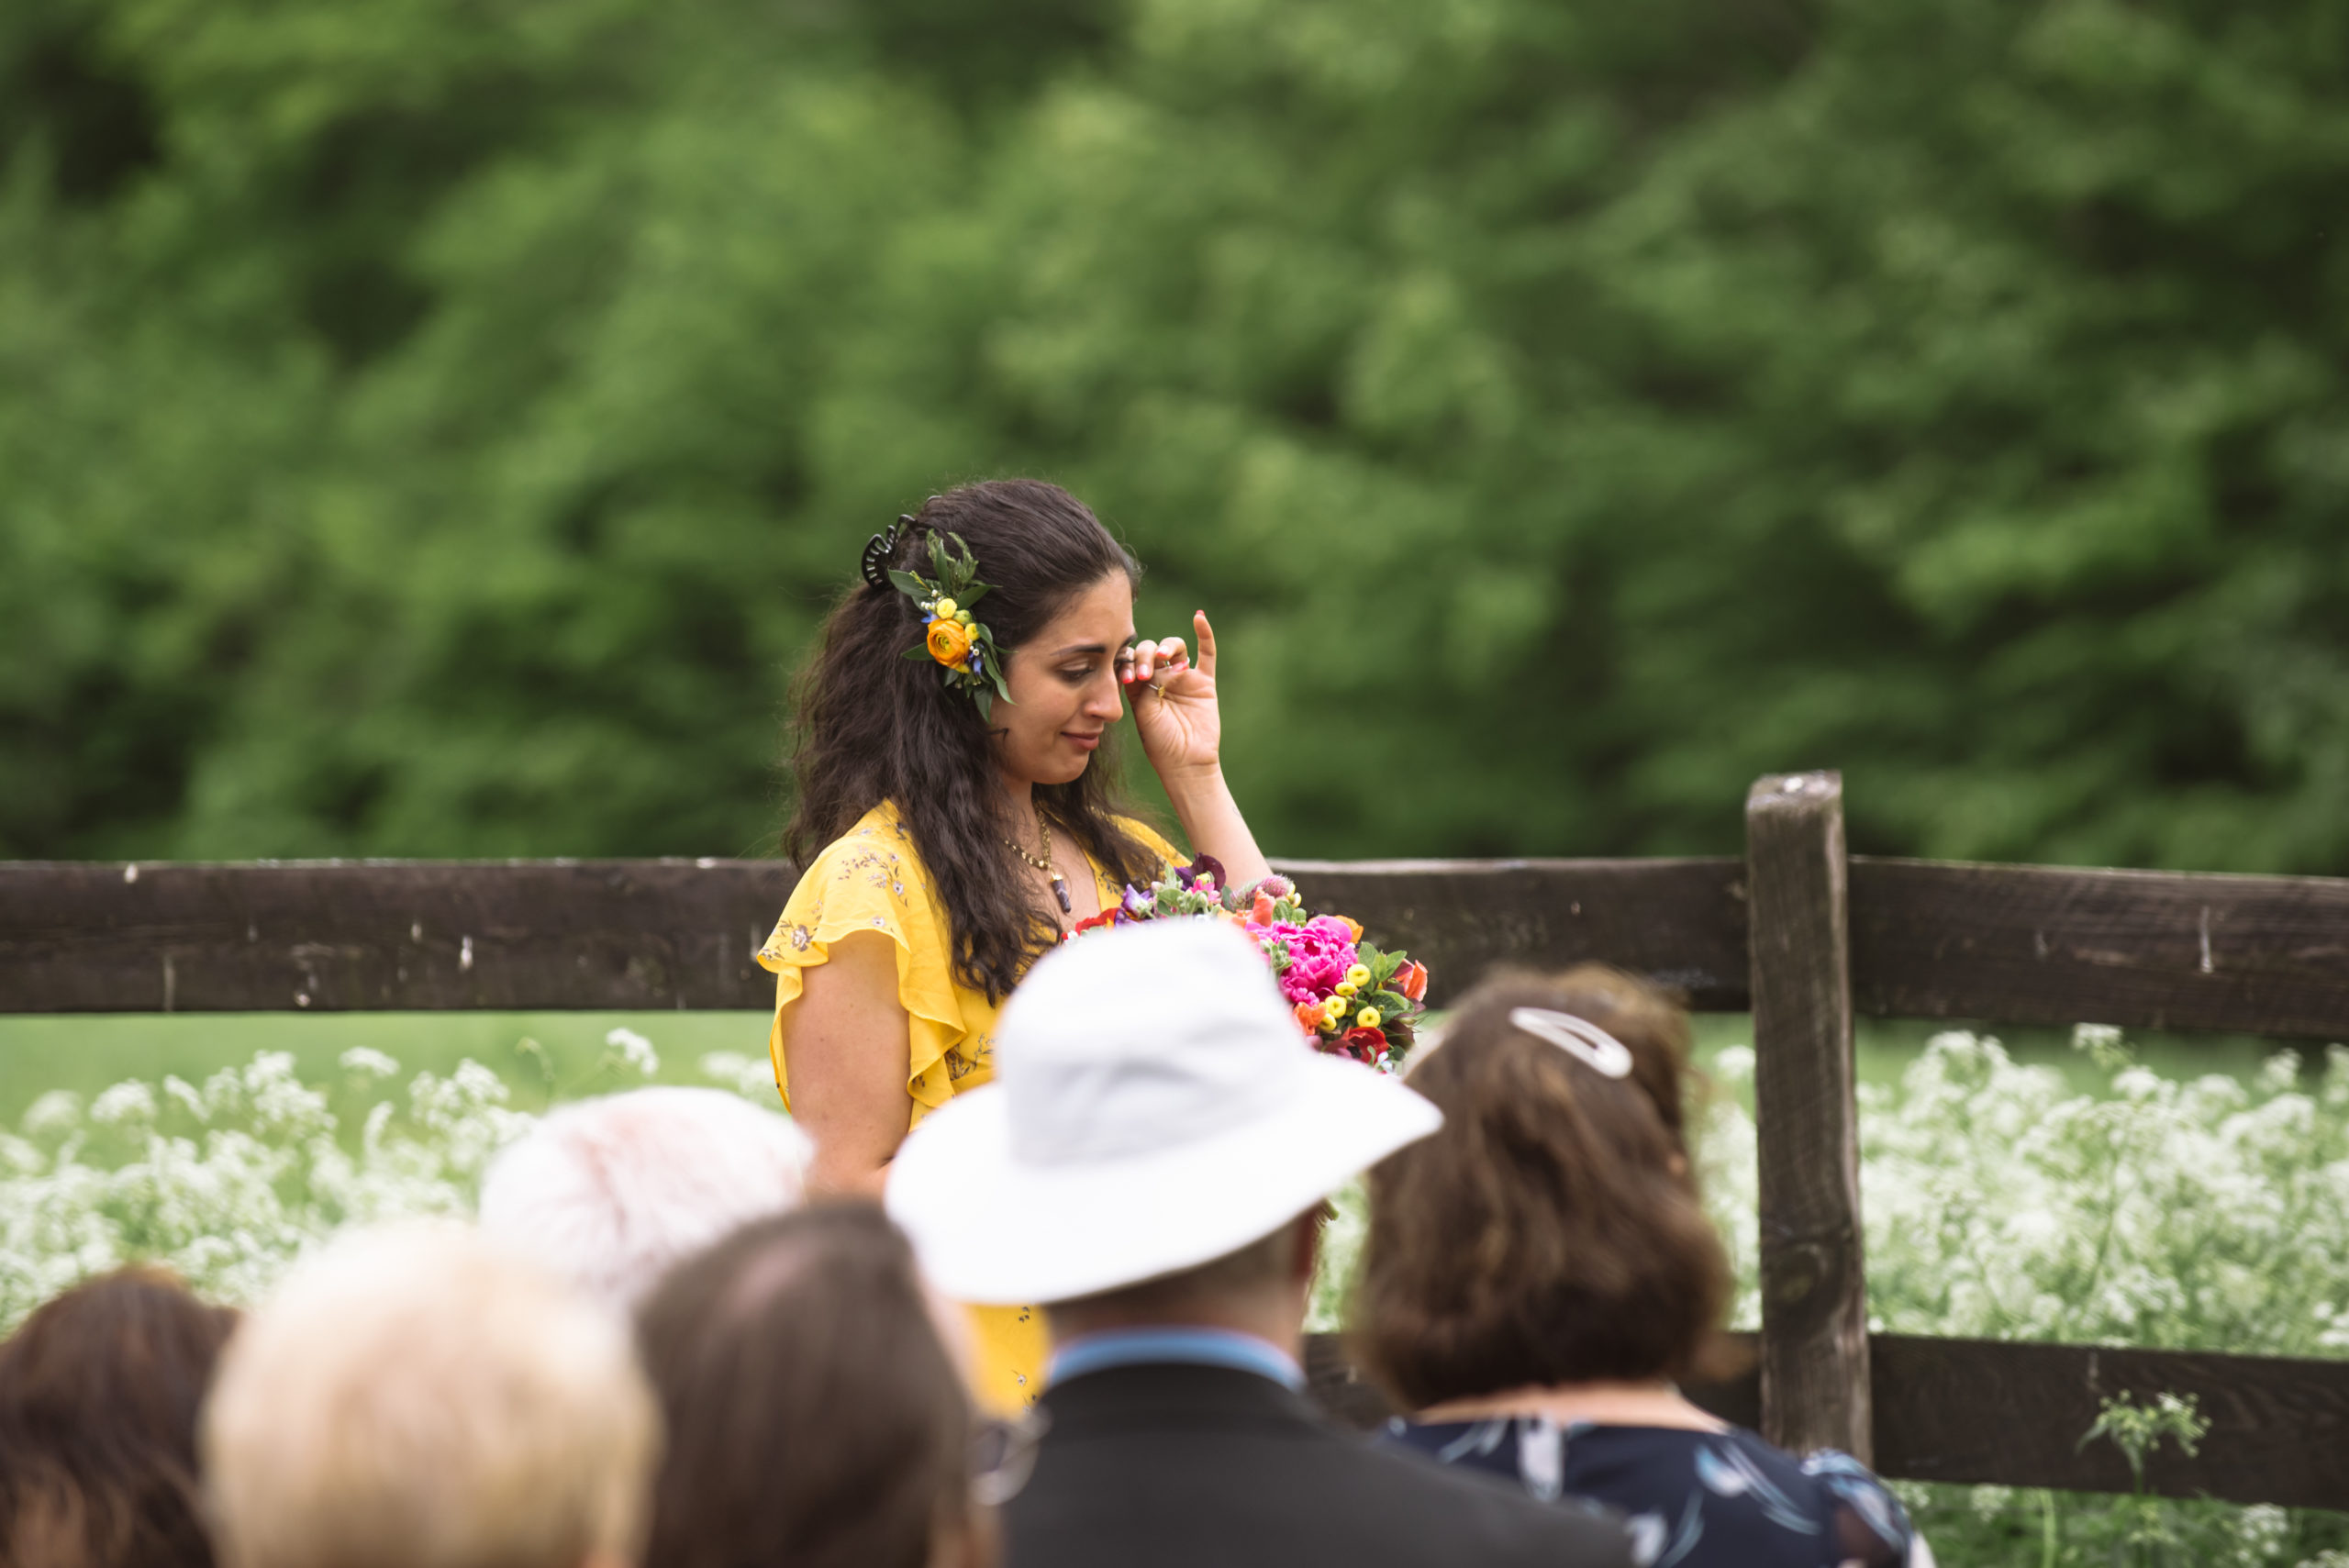 Maid of honor, the bride's sister, wiping away a tear during the ceremony. She is wearing a yellow floral dress with citrus colored florals in her hair. Seated guests are seen in the foreground.